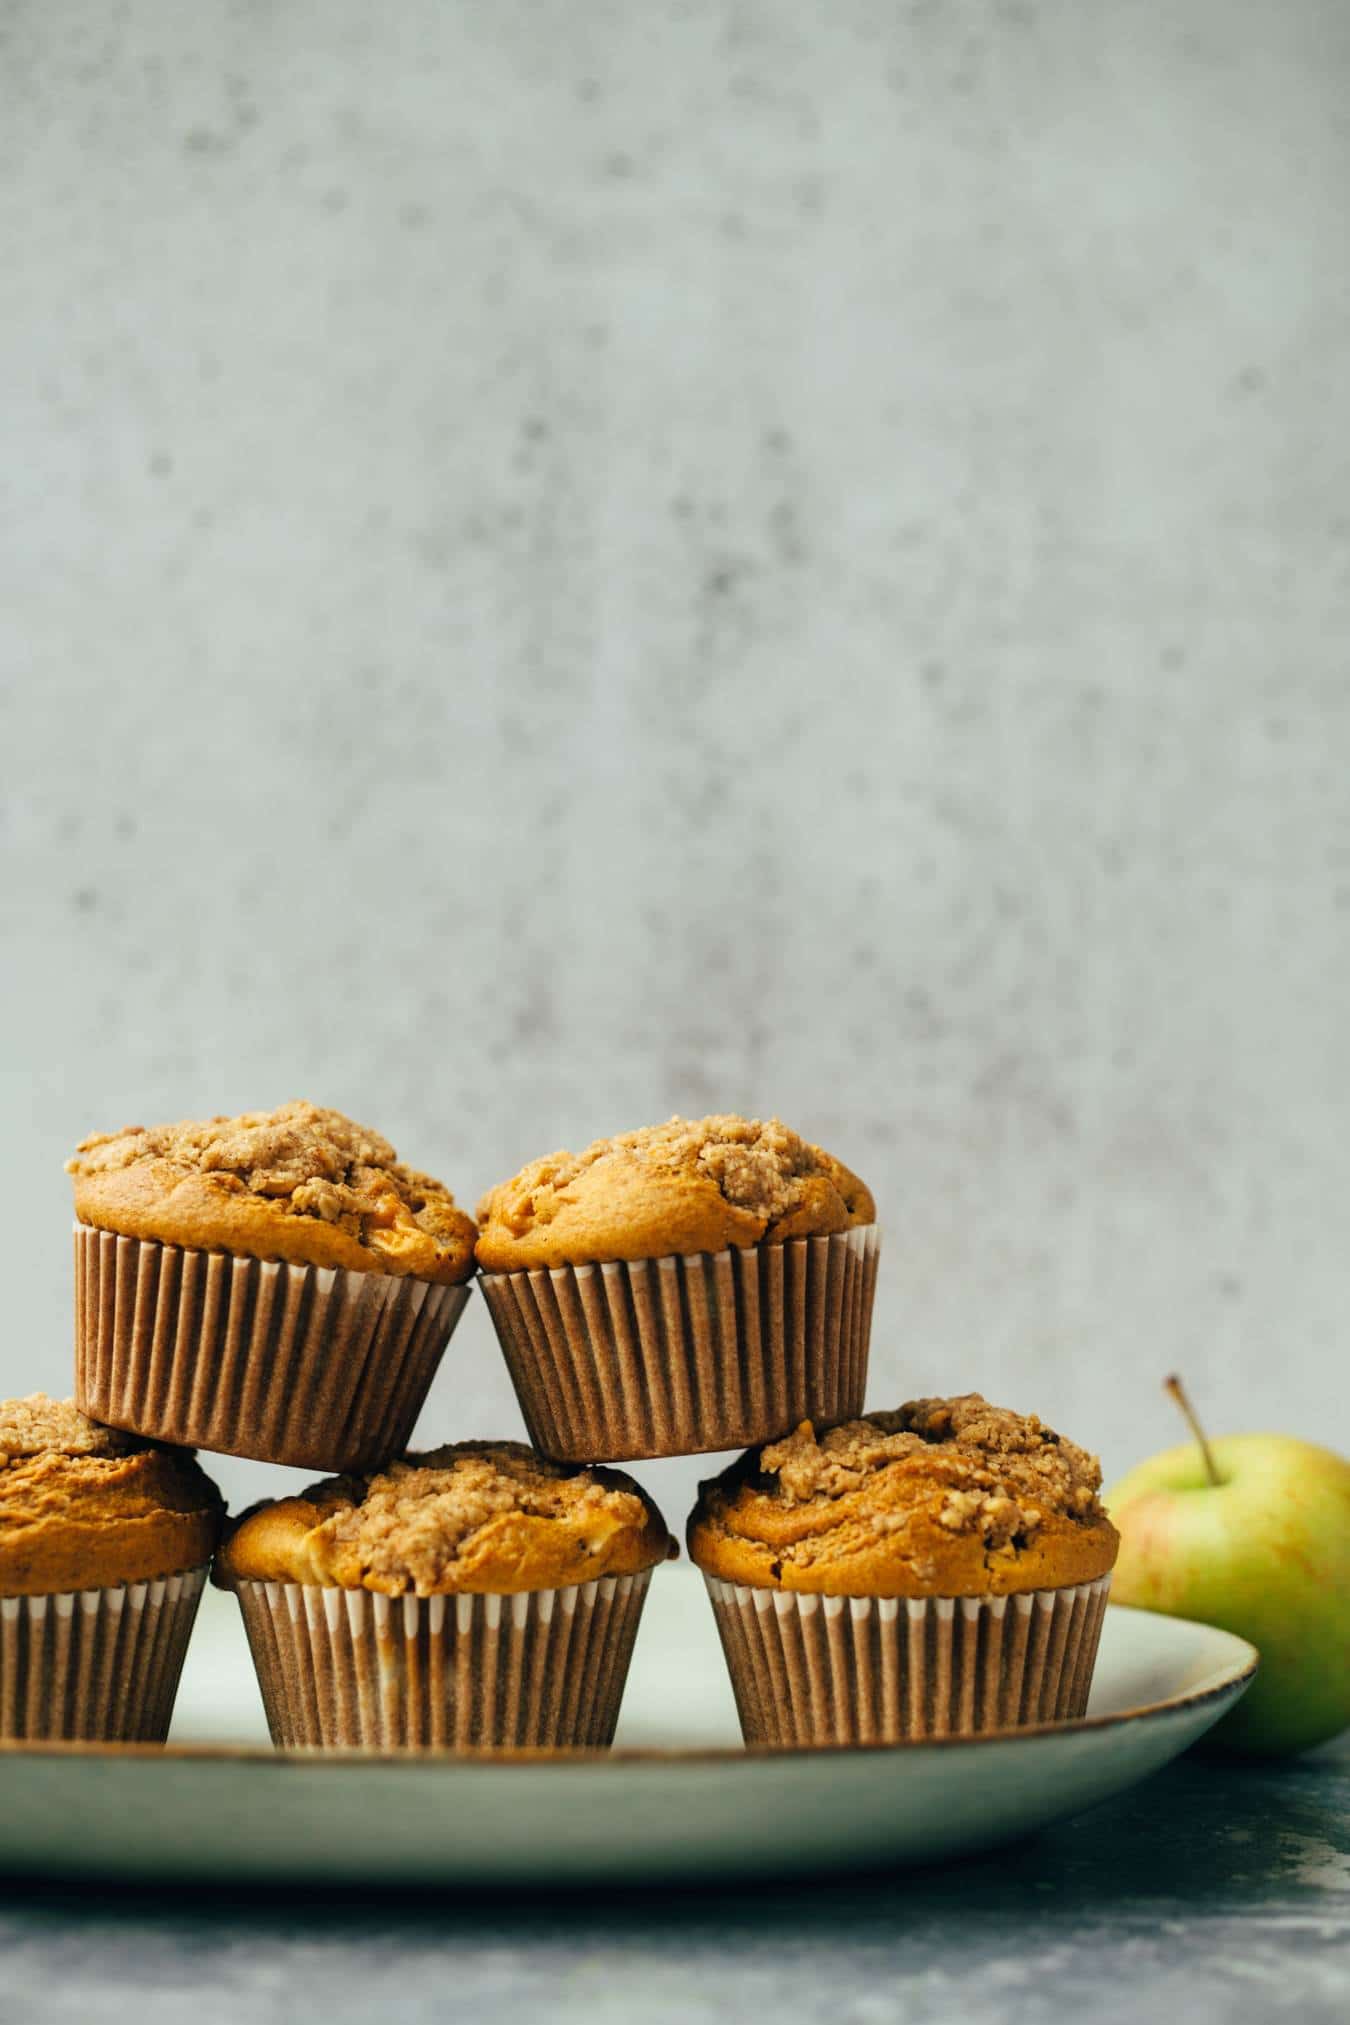 Apple muffins with cinnamon crumble (vegan, lactose-free)